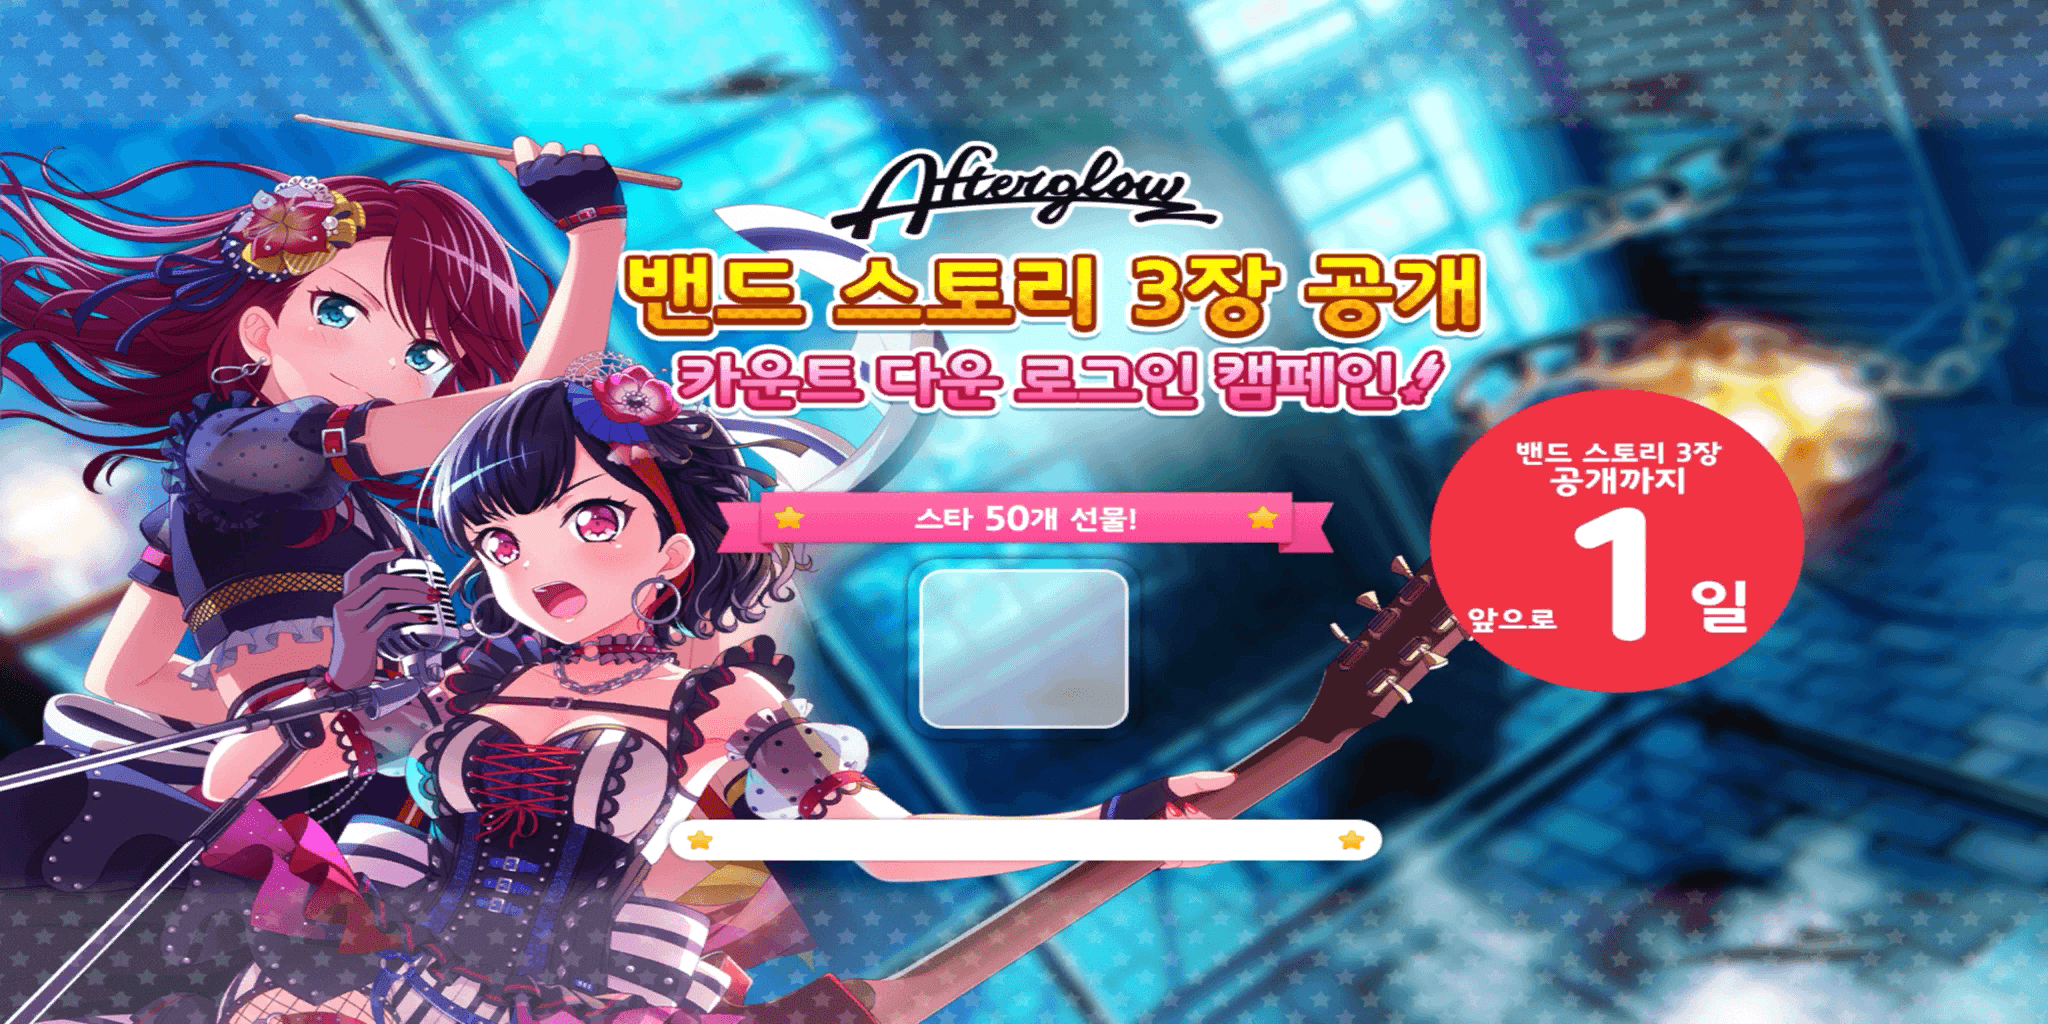 Thanks to the latest JP event, the Afterglow event banners now make a nice  little set : r/BanGDream